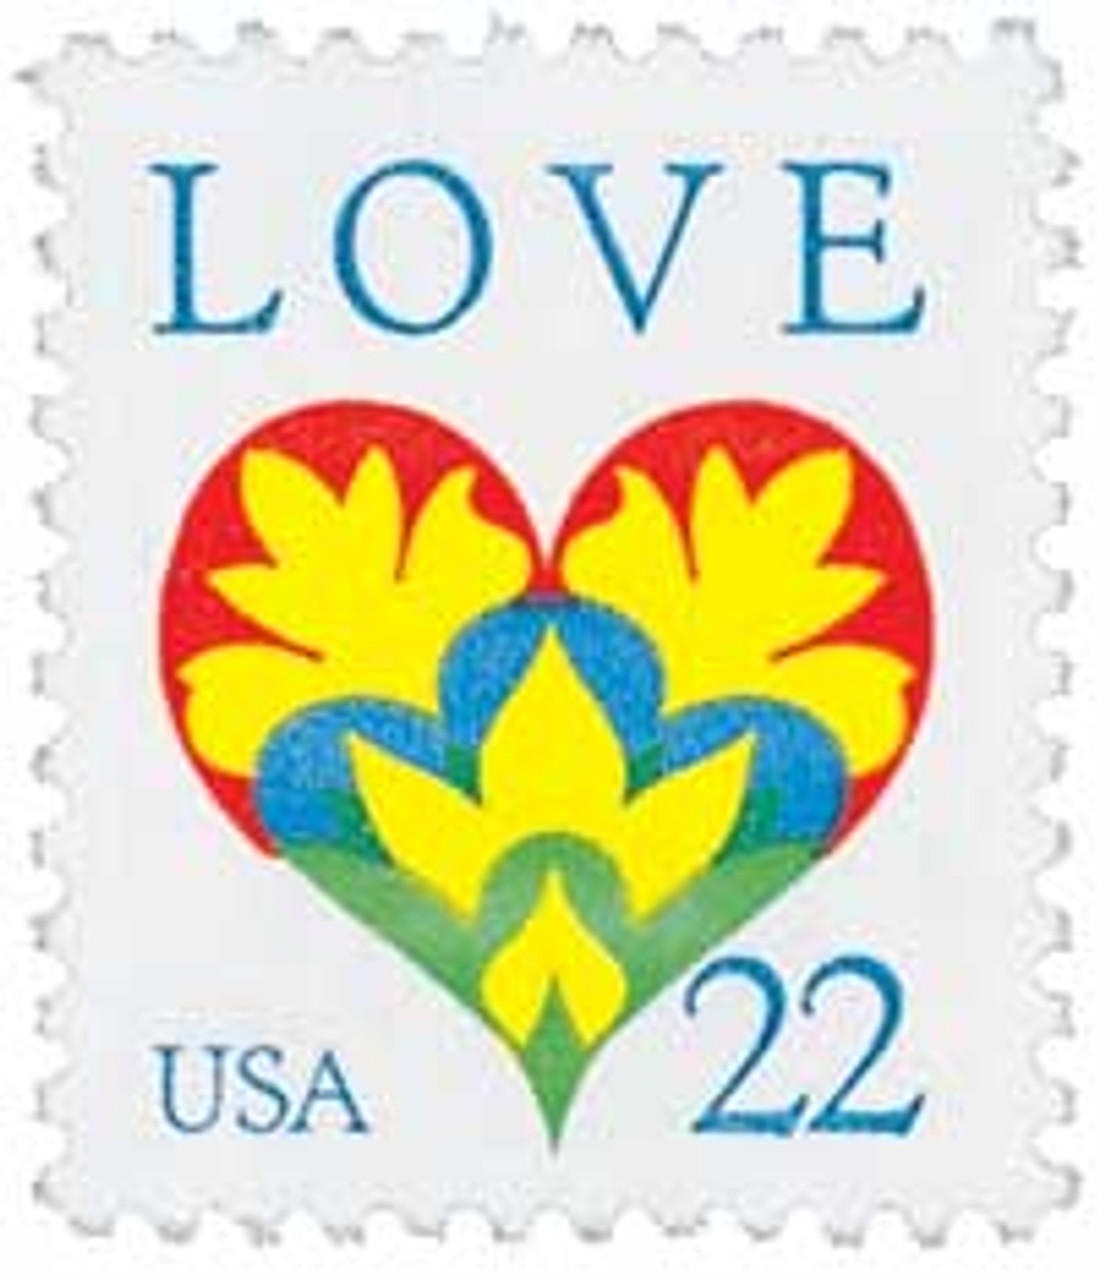 1951/2379 - 1980s Love Collection, 7 stamps - Mystic Stamp Company